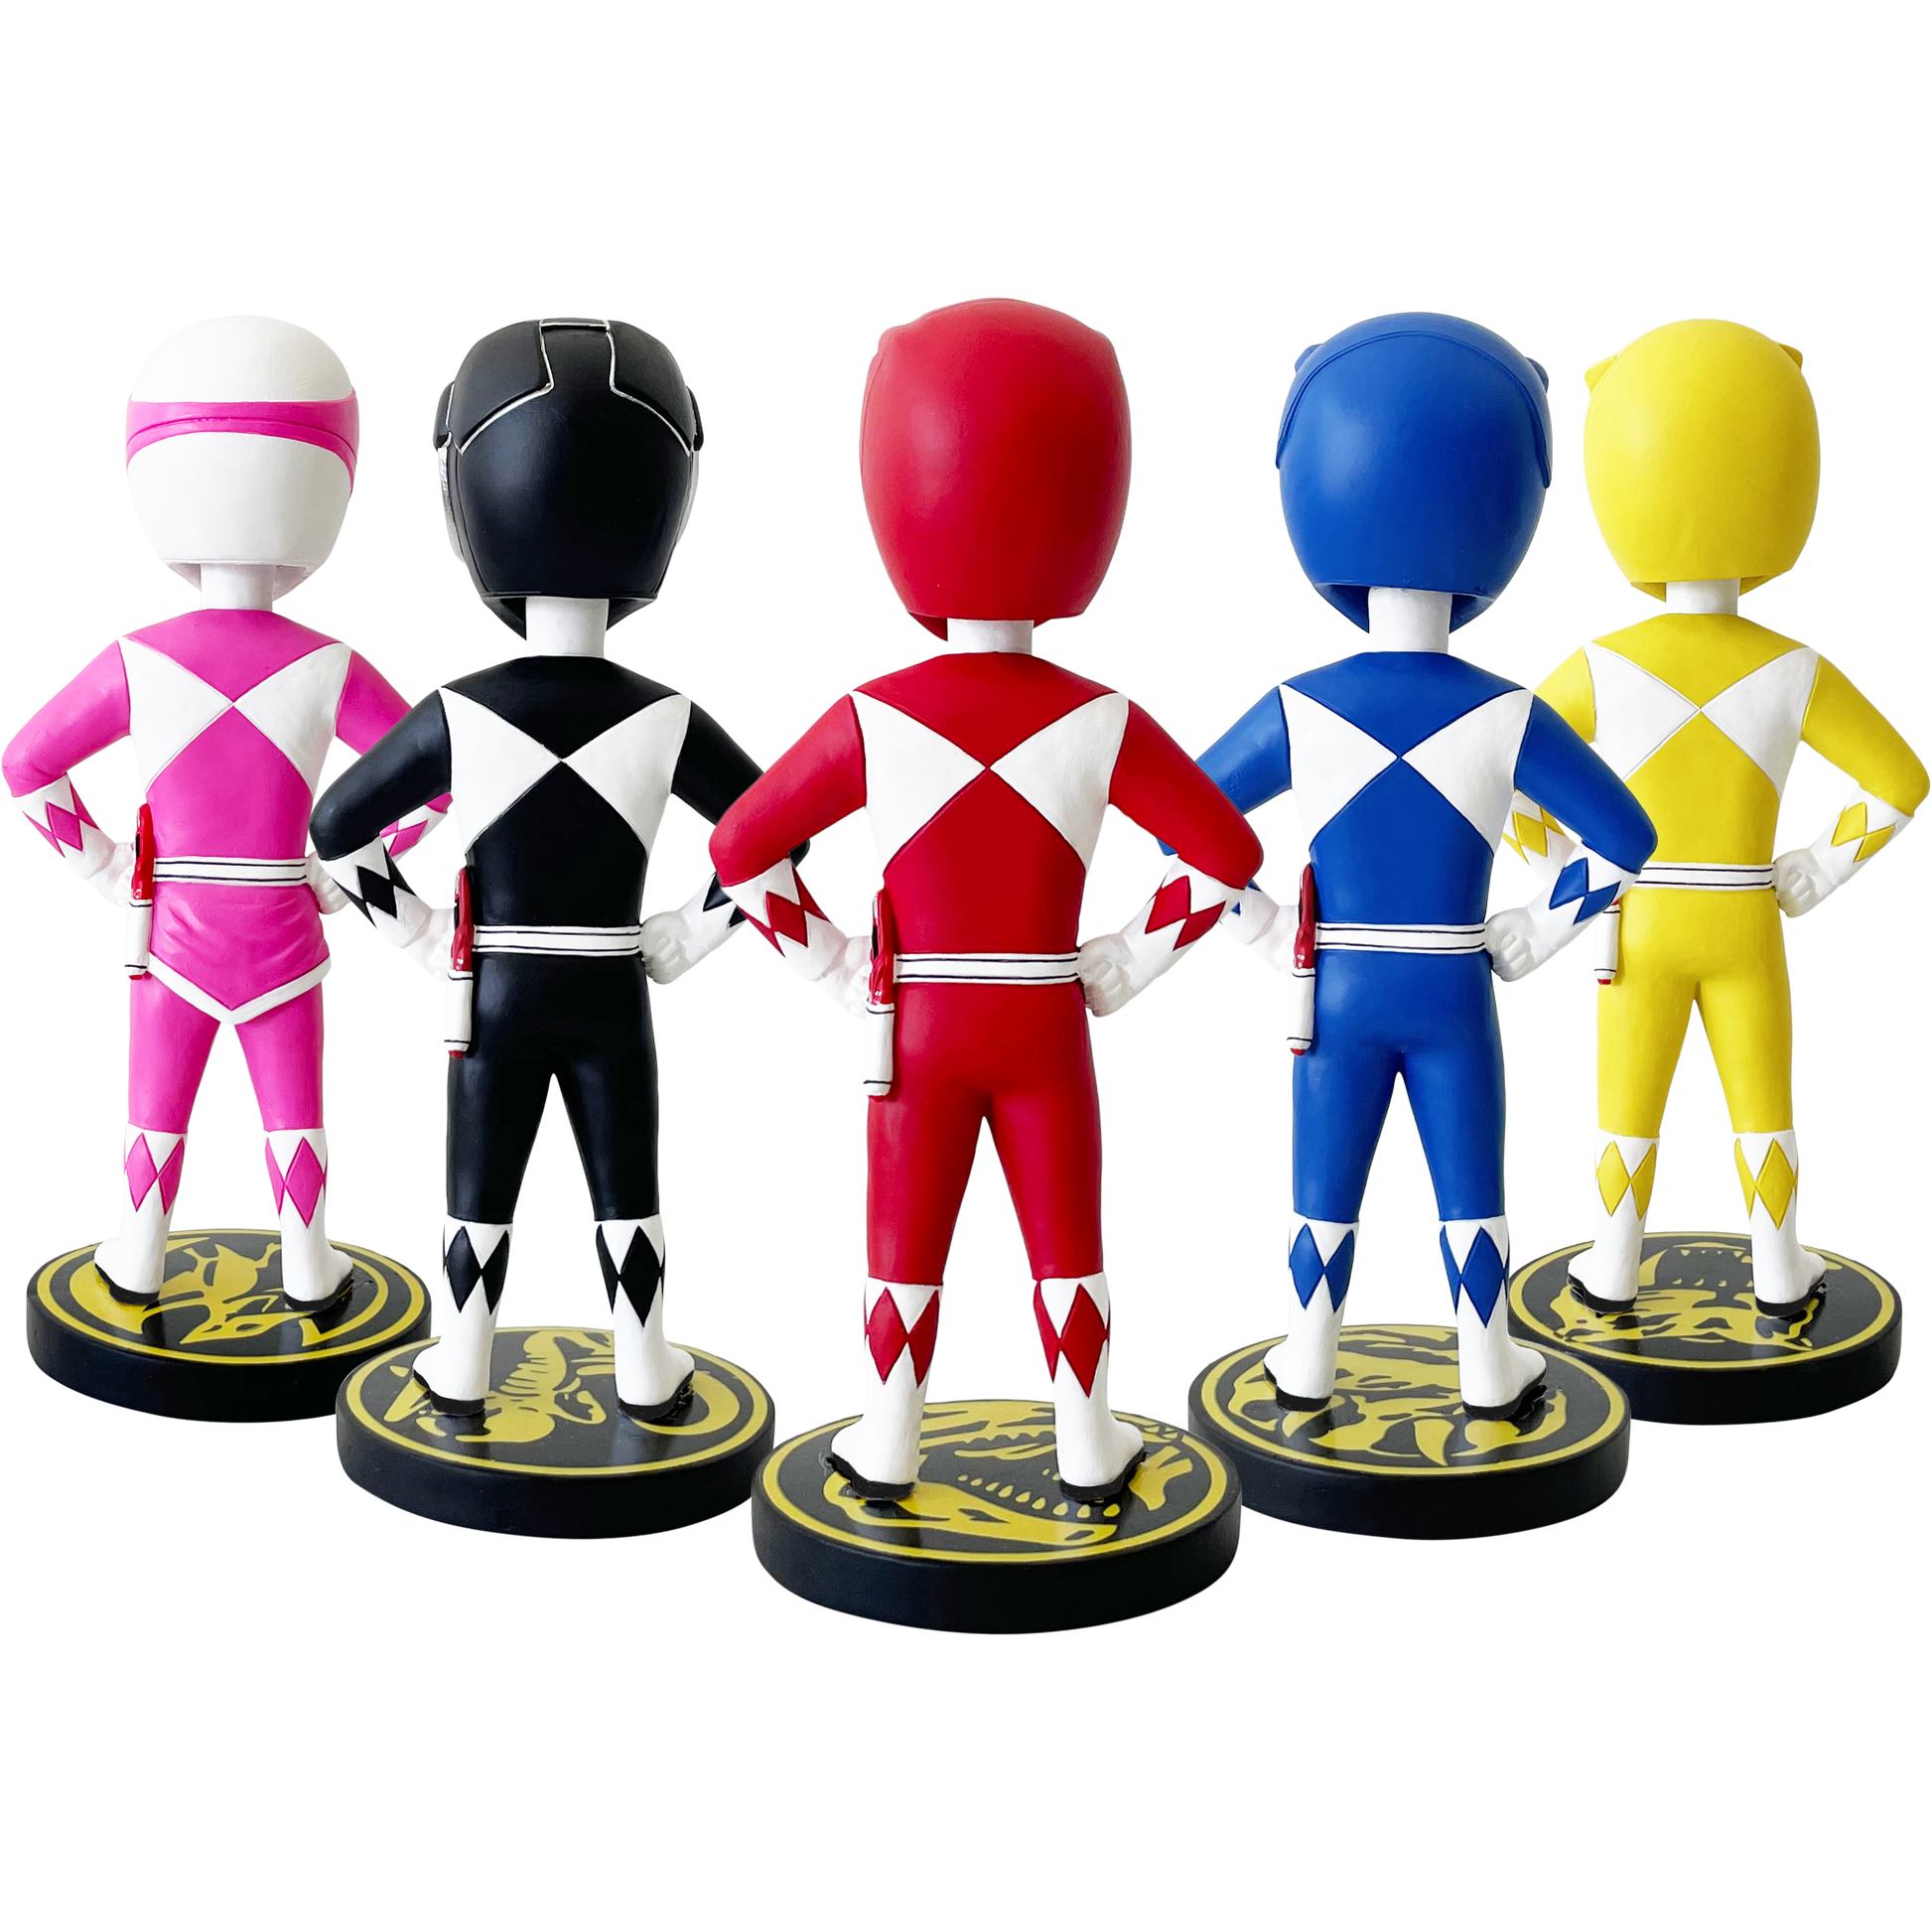 Power Rangers Polystone Bobbleheads Boxed Set - Available 3rd Quarter 2023 - Icon Heroes 